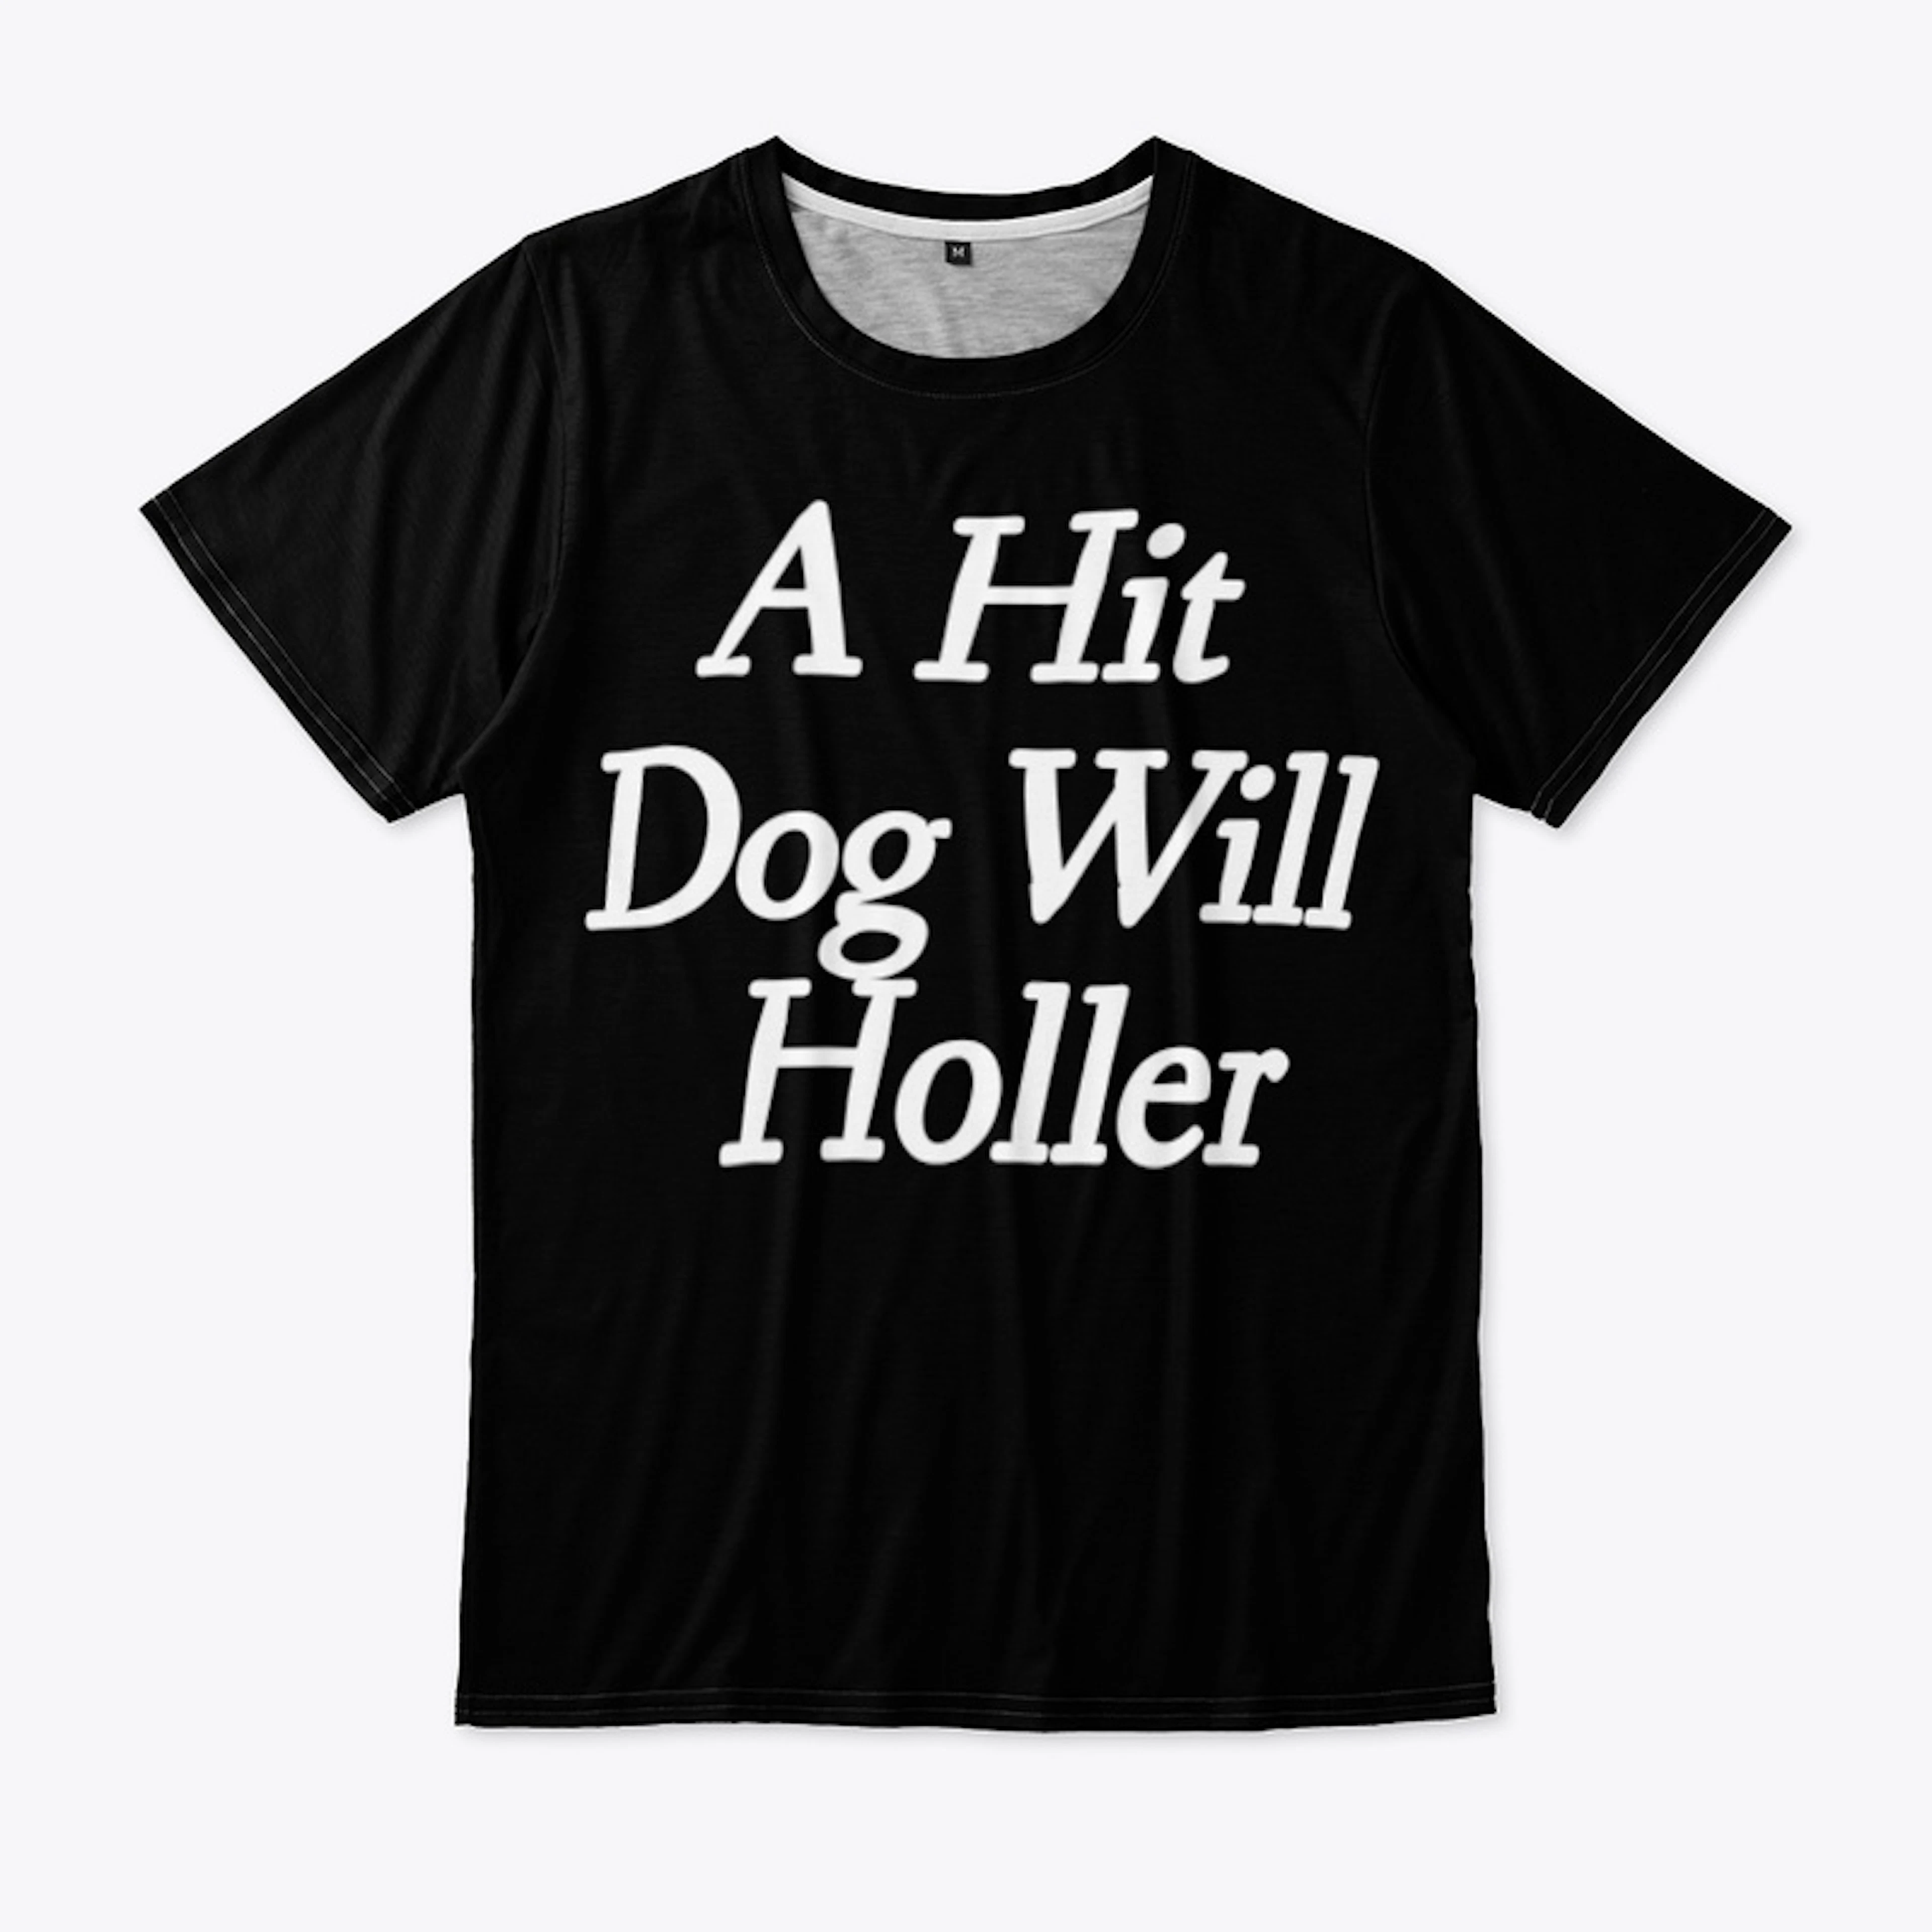 A Hit Dog Will Holler